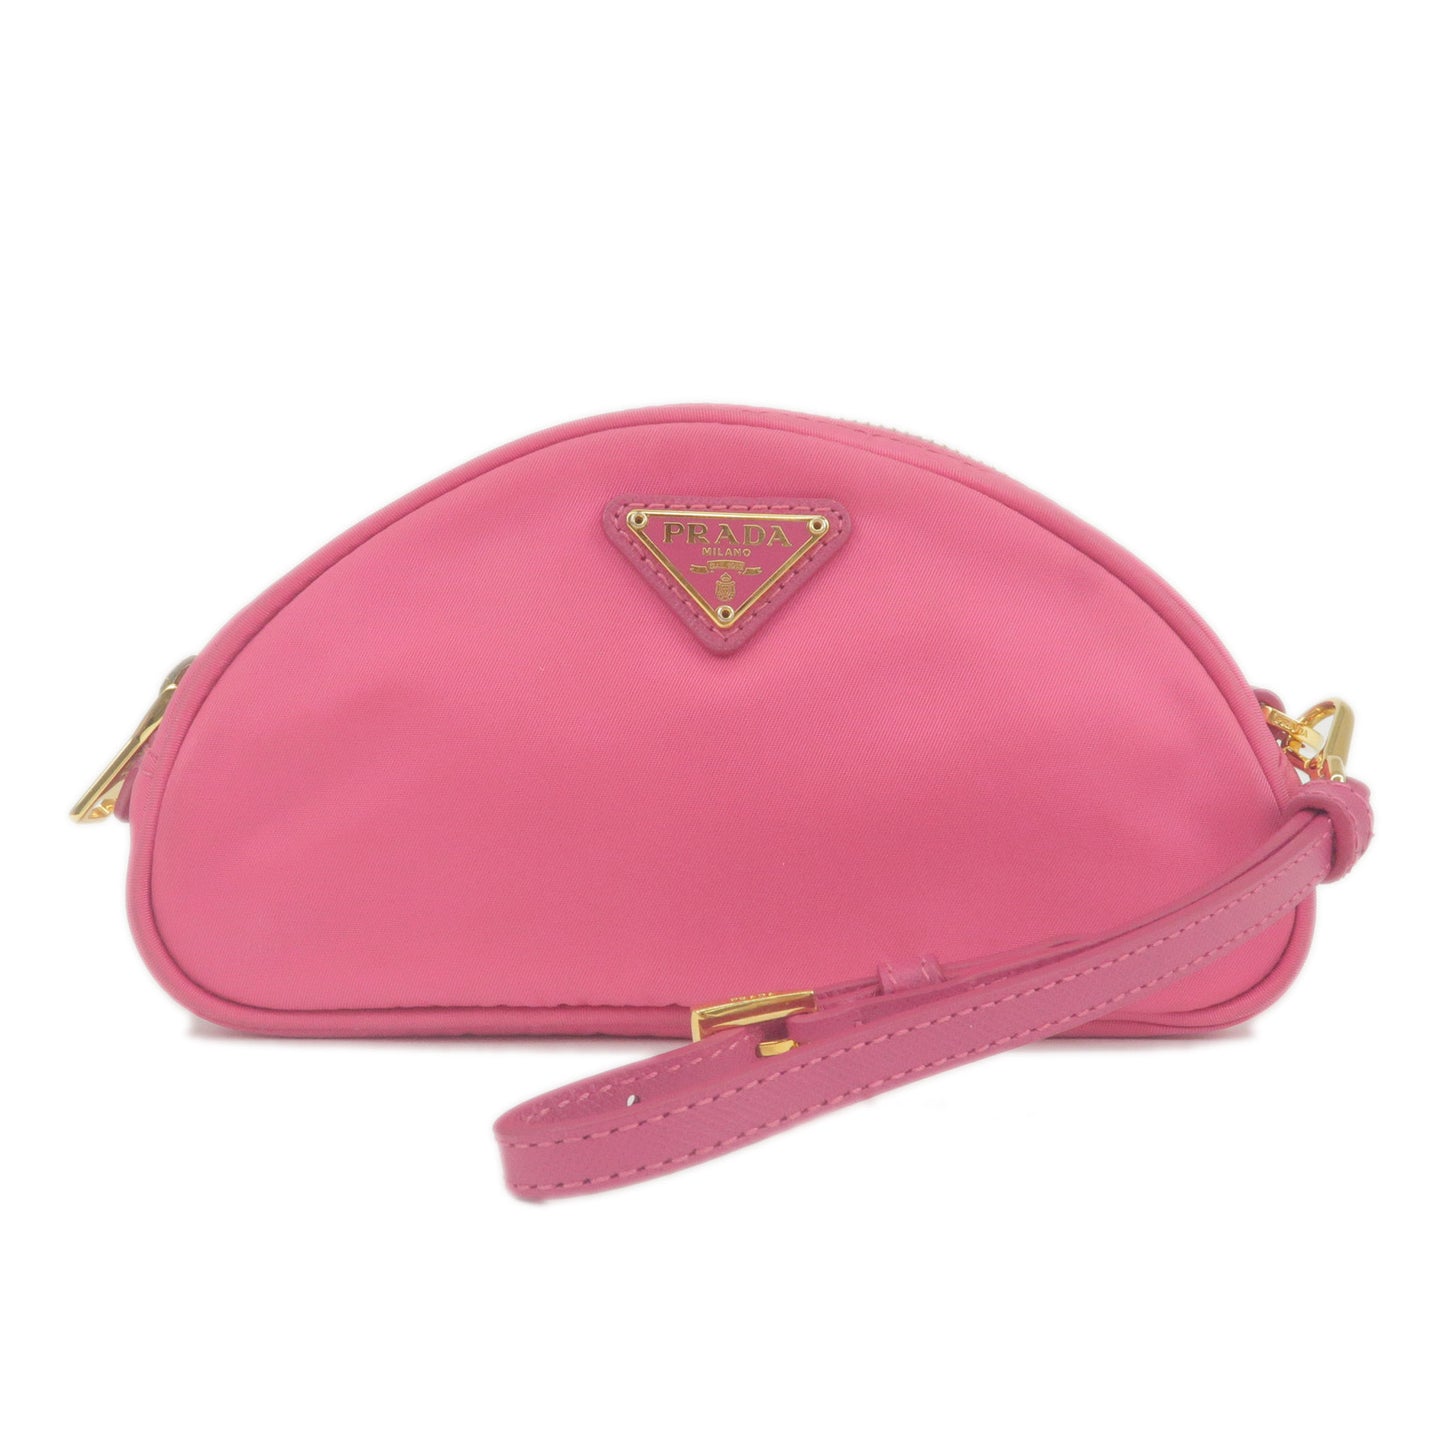 PRADA-Logo-Nylon-Leather-Pouch-Cosmetic-Pouch-Pink-1N1867